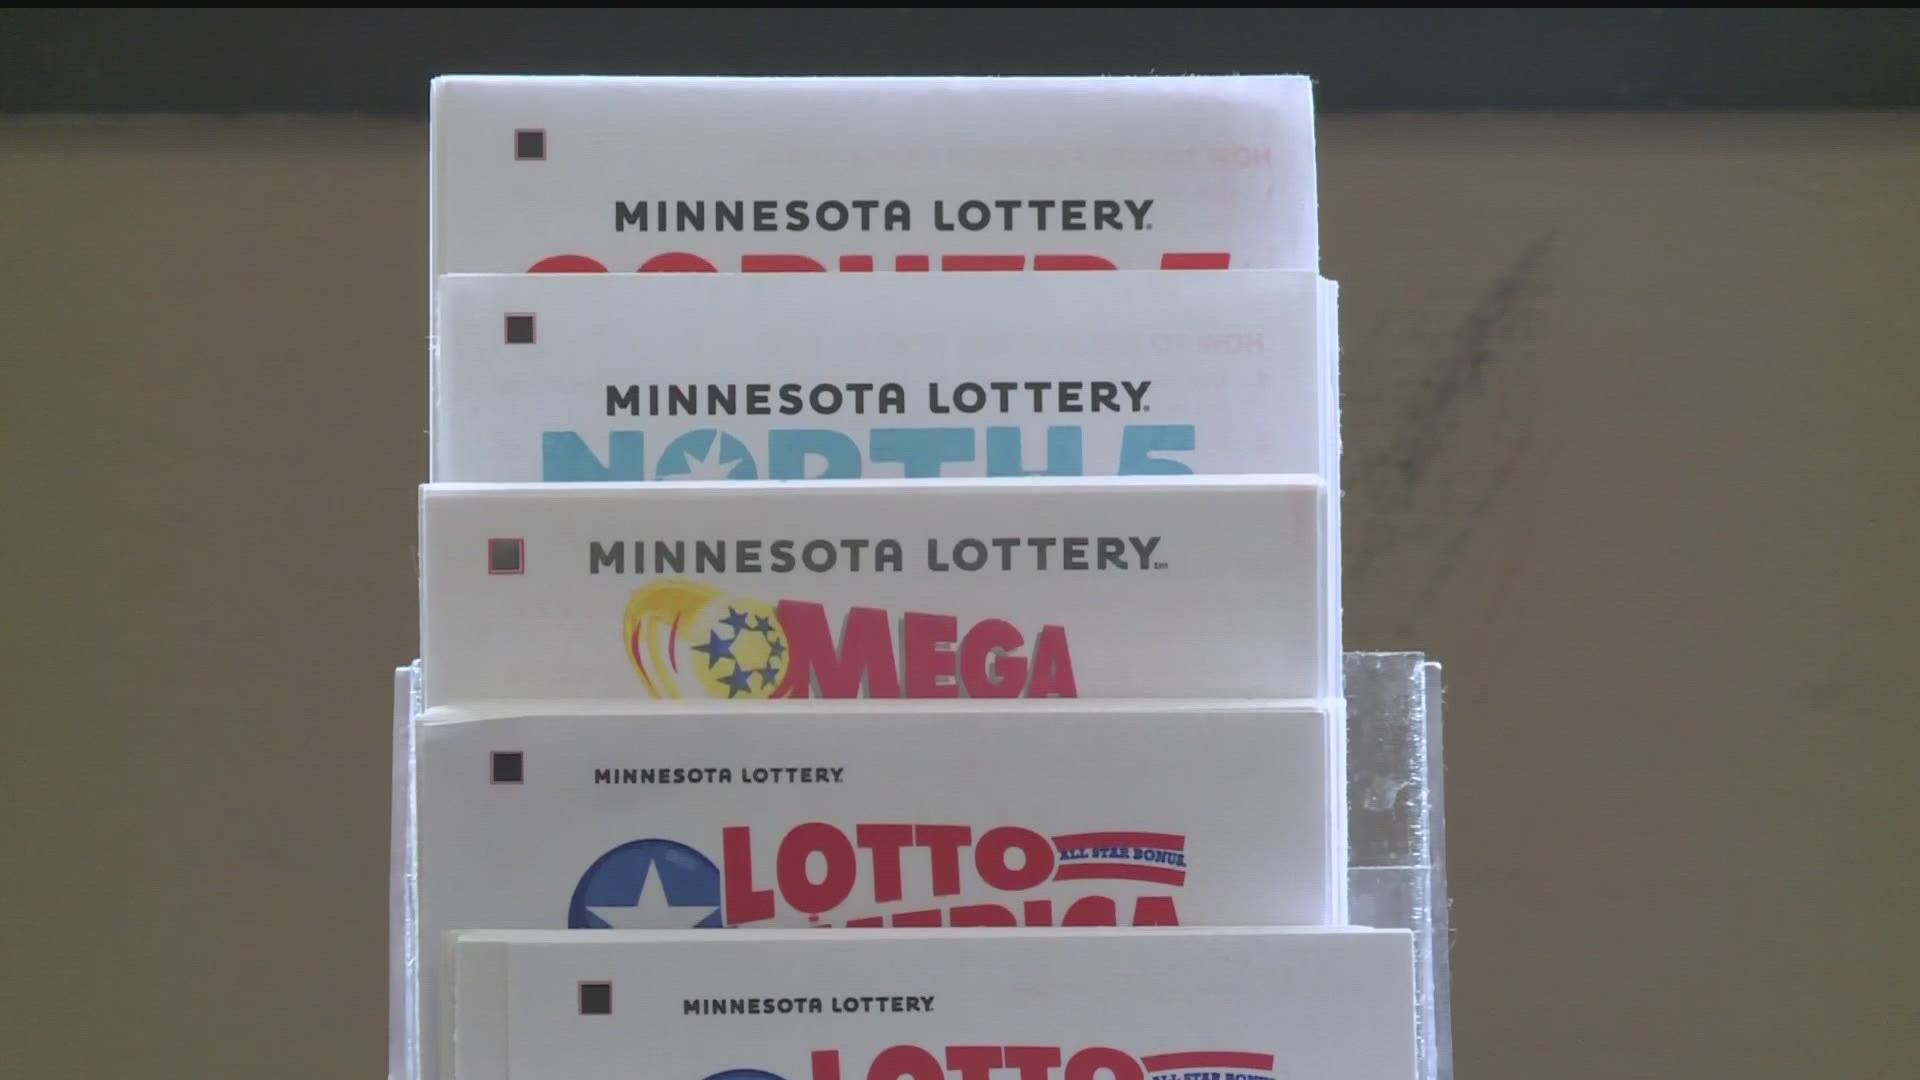 The Land of 10,000 Lakes will welcome two new millionaires after two lucky people drew the winning tickets for the million-dollar prize.